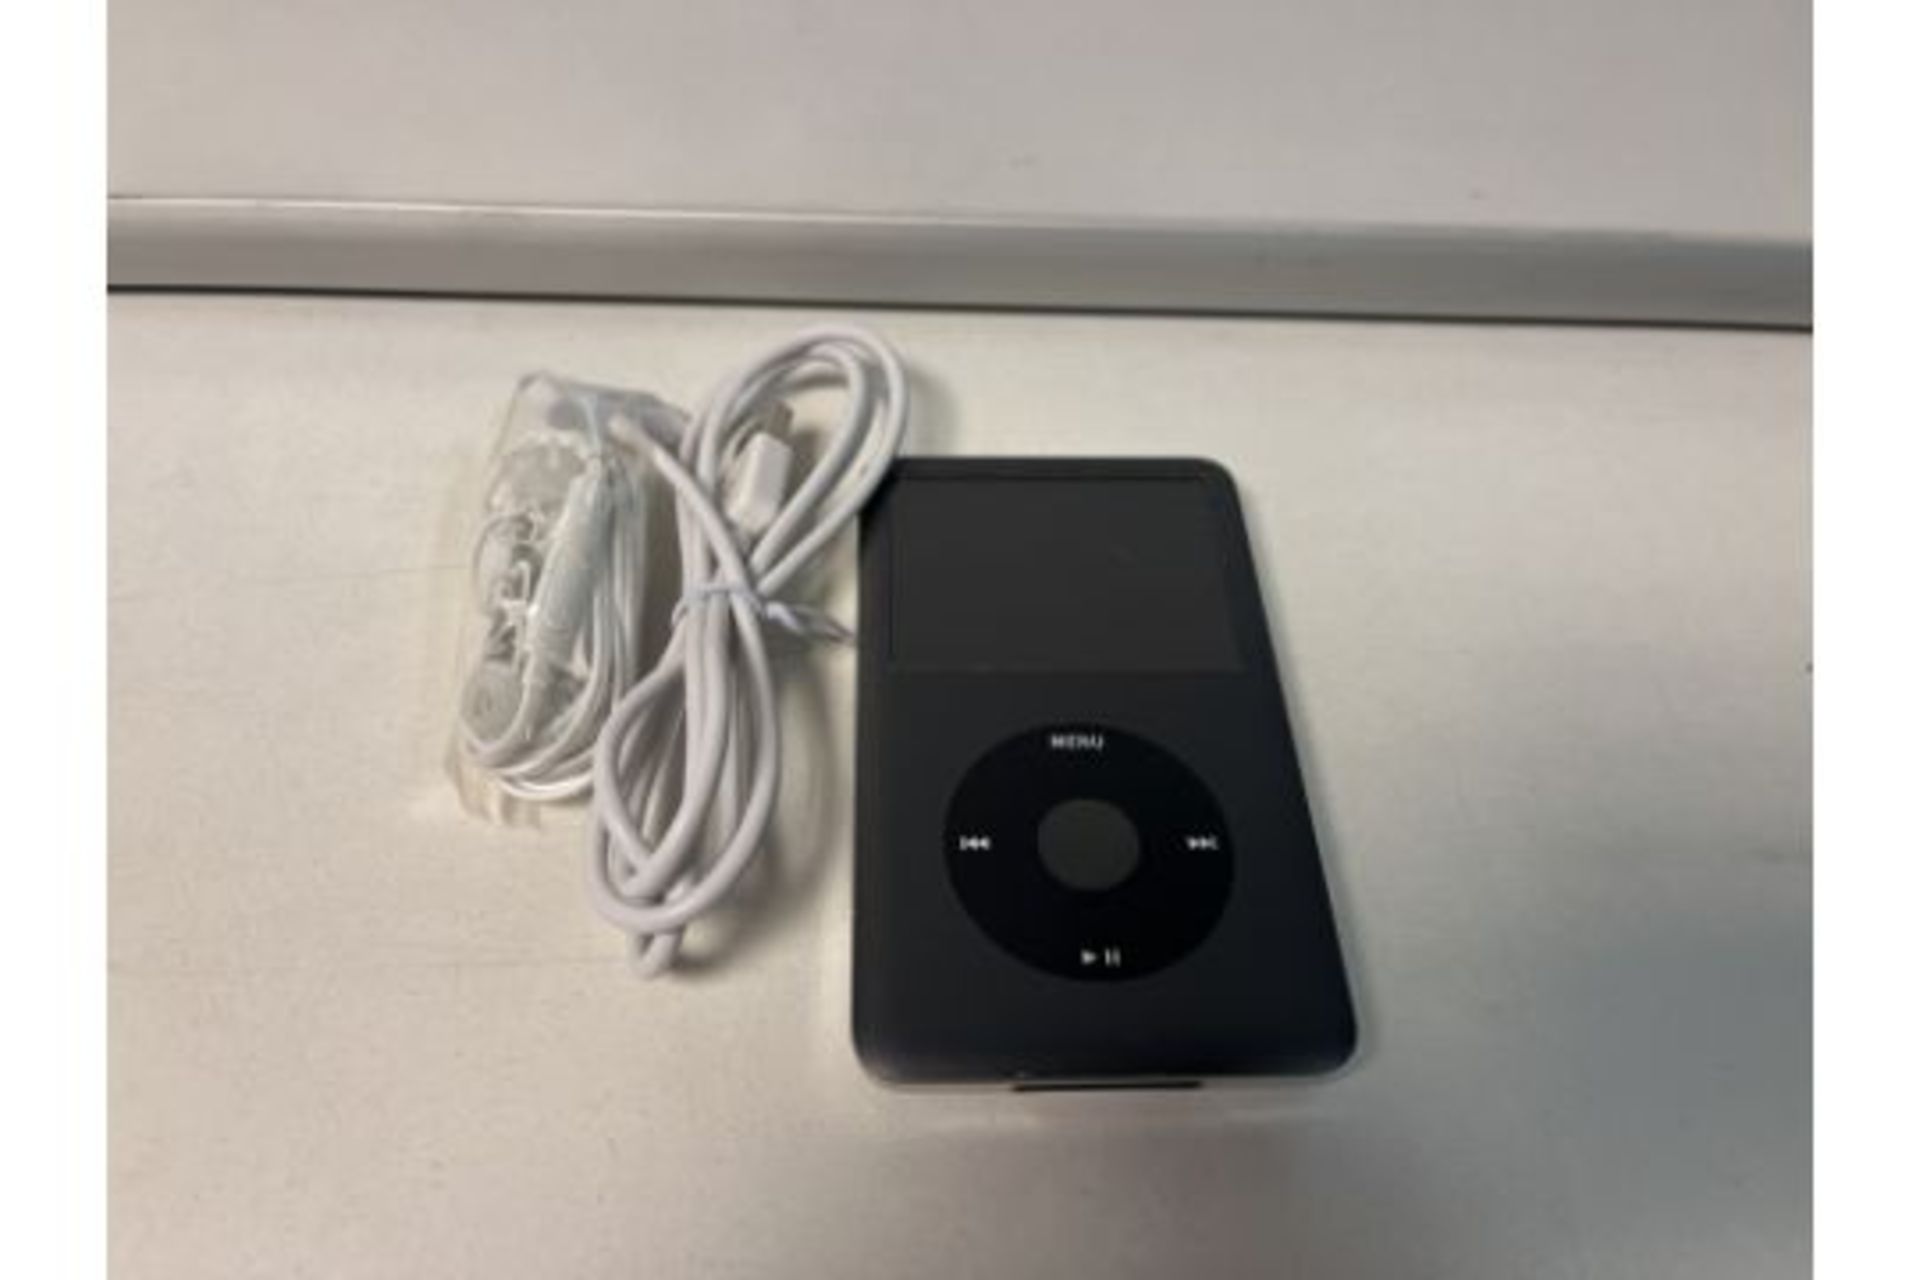 APPLE IPOD CLASSIC, 16GB STORAGE, EARPHONES AND CHARGER (143)